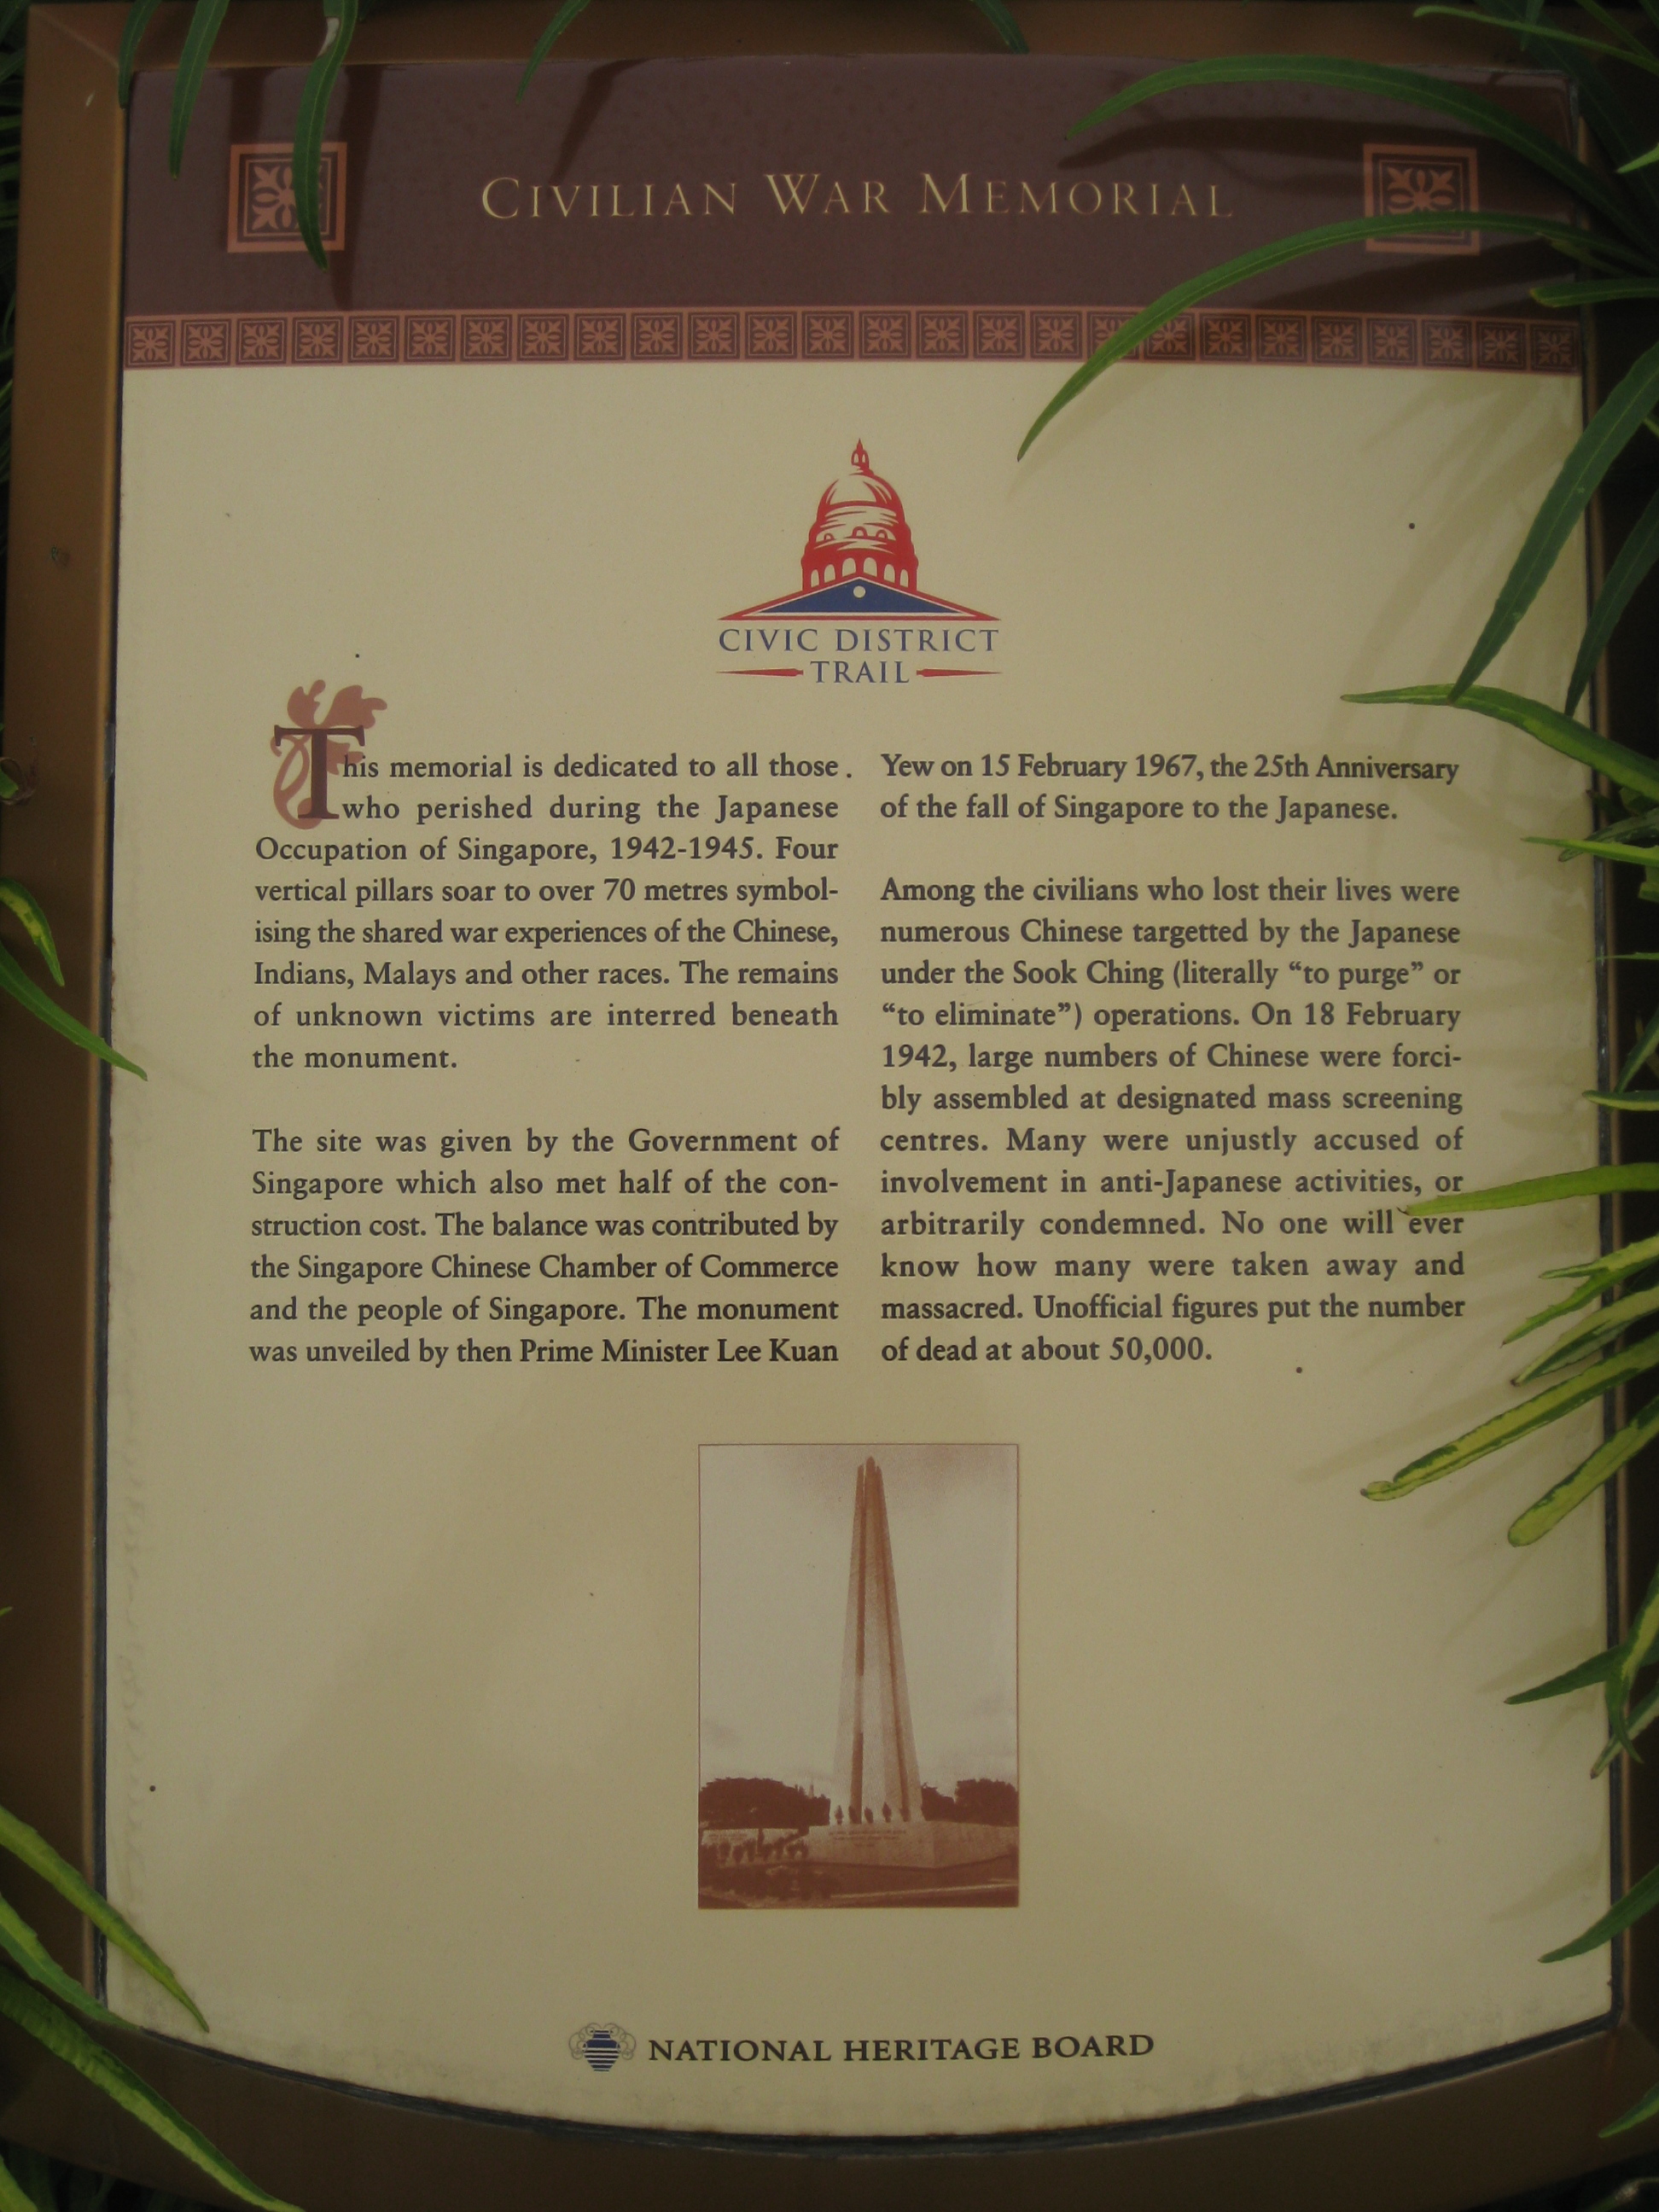  The National Heritage Board's (NHB) placard at the Civilian War Memorial 